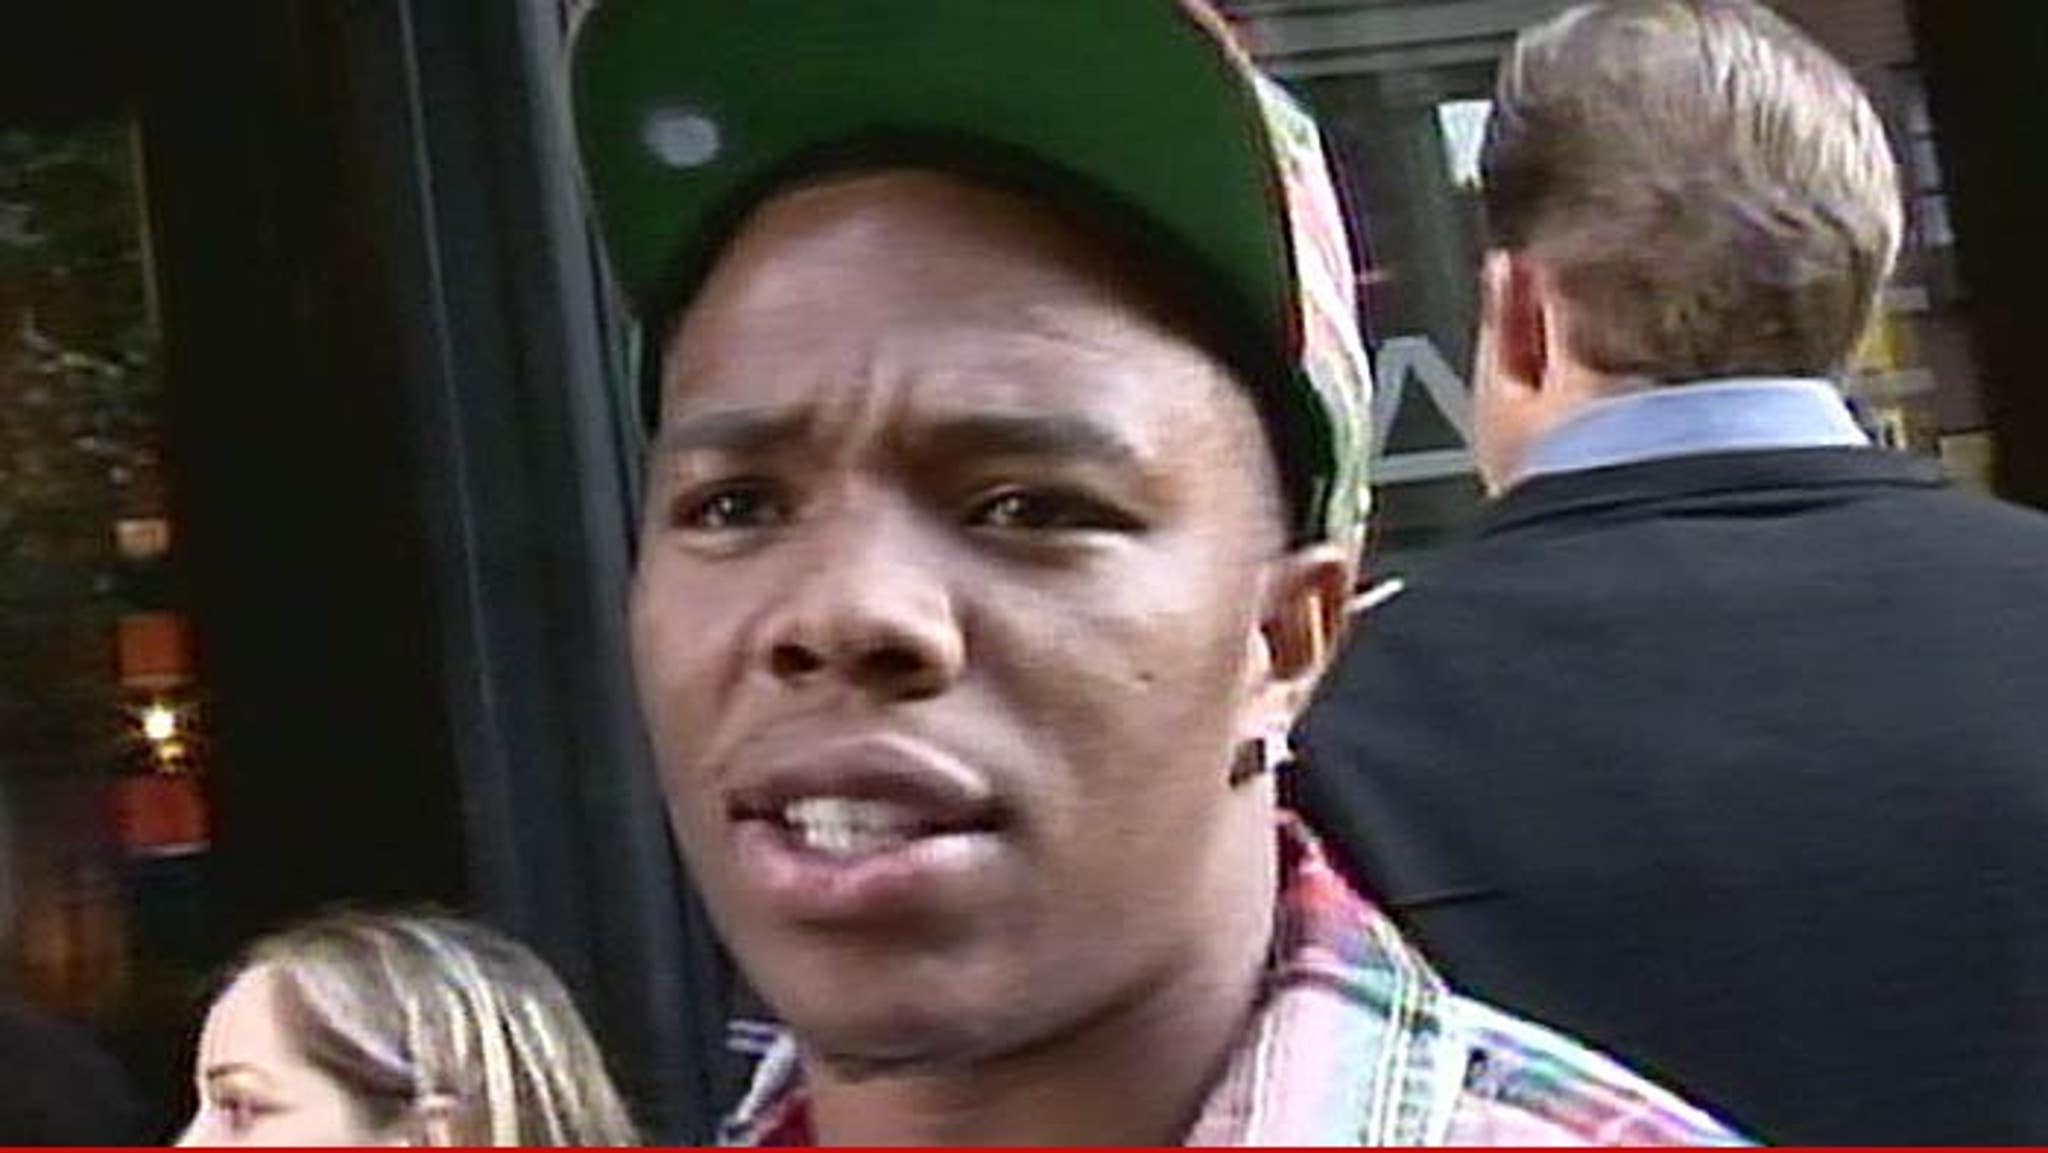 The NFL tells TMZ Sports ... league officials did NOT see the new Ray Rice elevator...